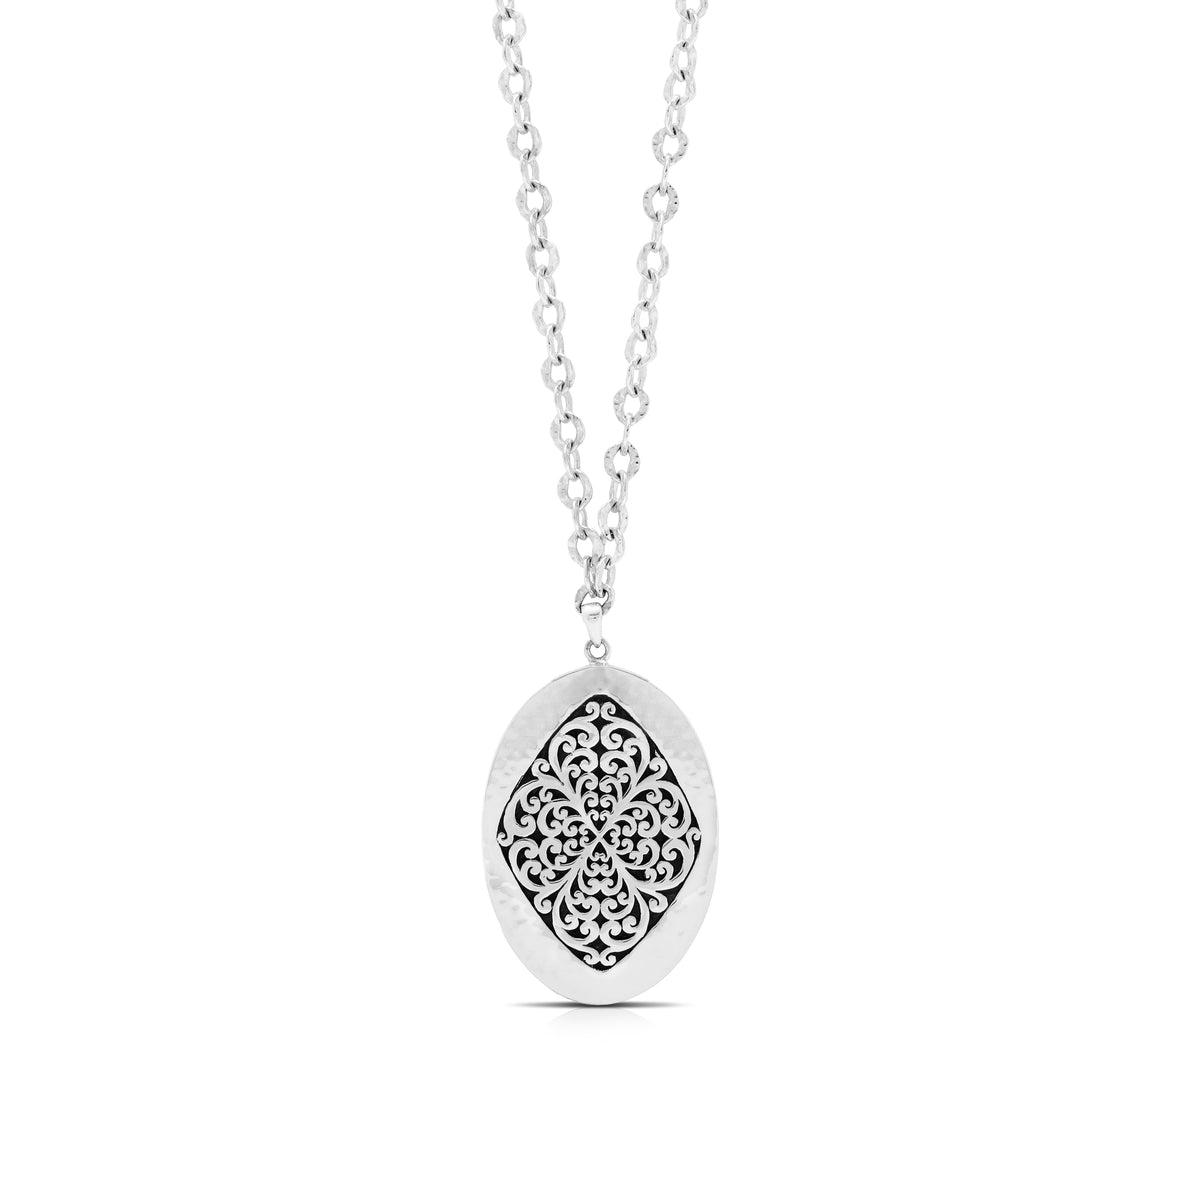 LH Geometric Scroll with Hammered Border Oval Pendant Necklace